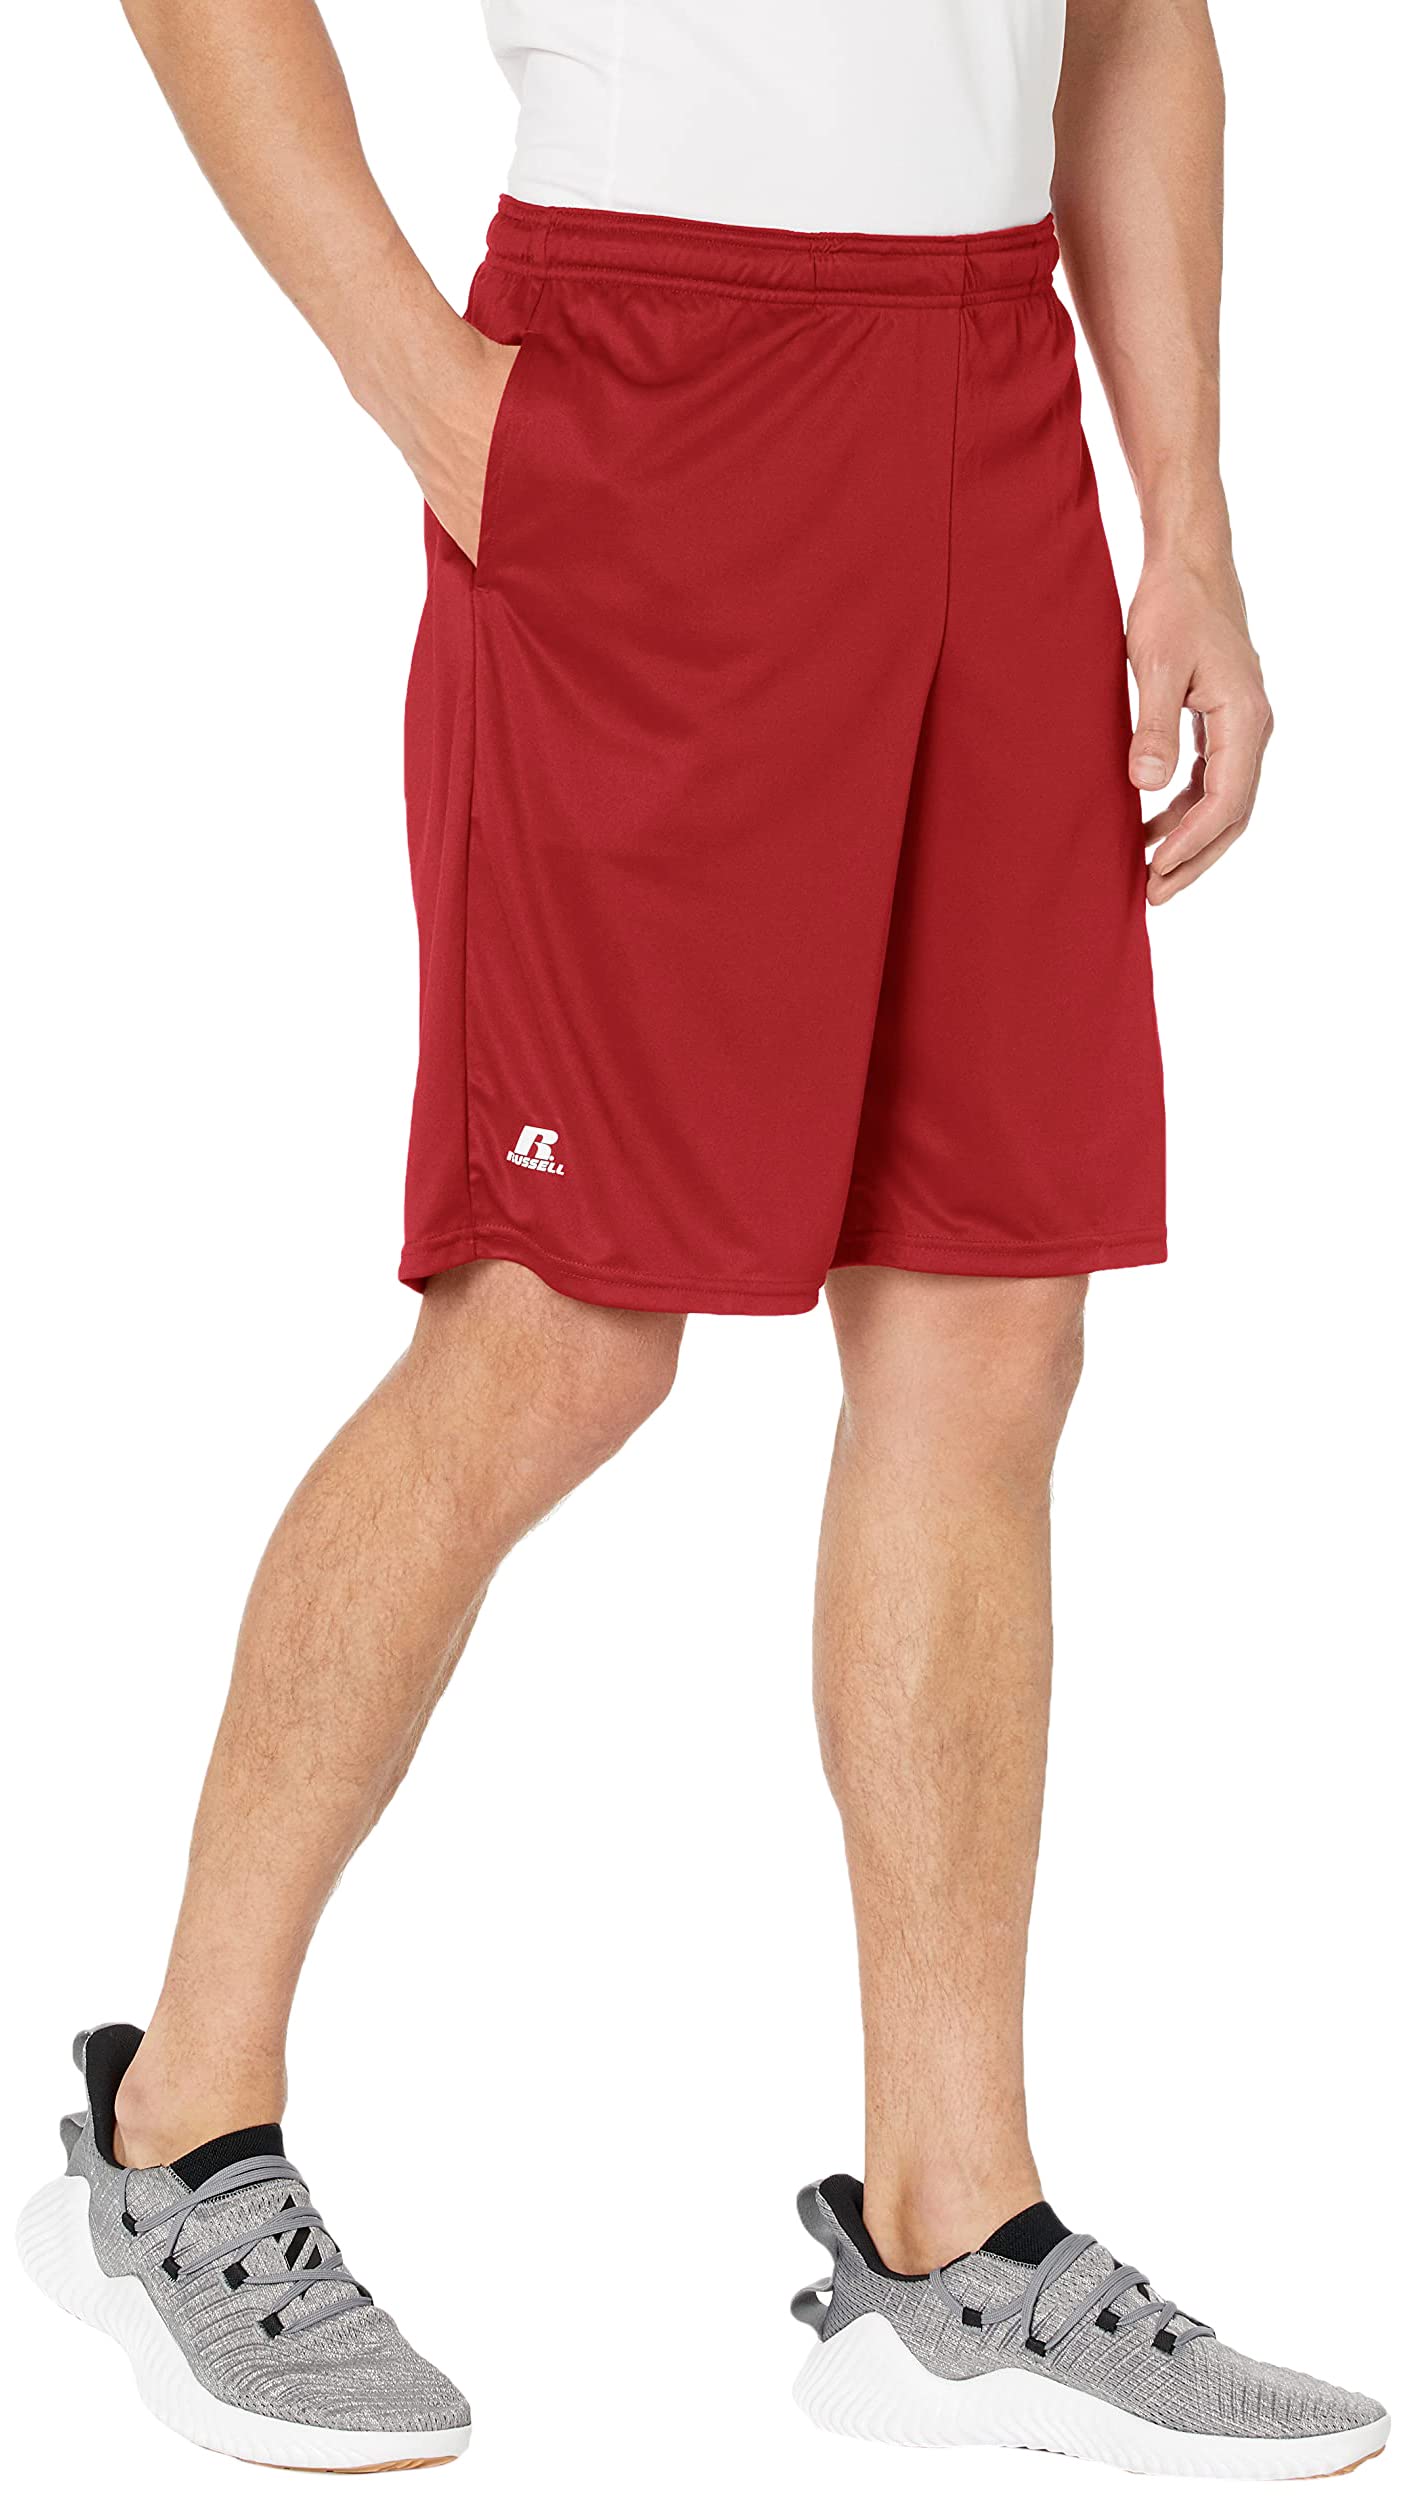 Russell Athletic Mens Standard Dri-Power Performance Short with Pockets, cardinal, 3XL